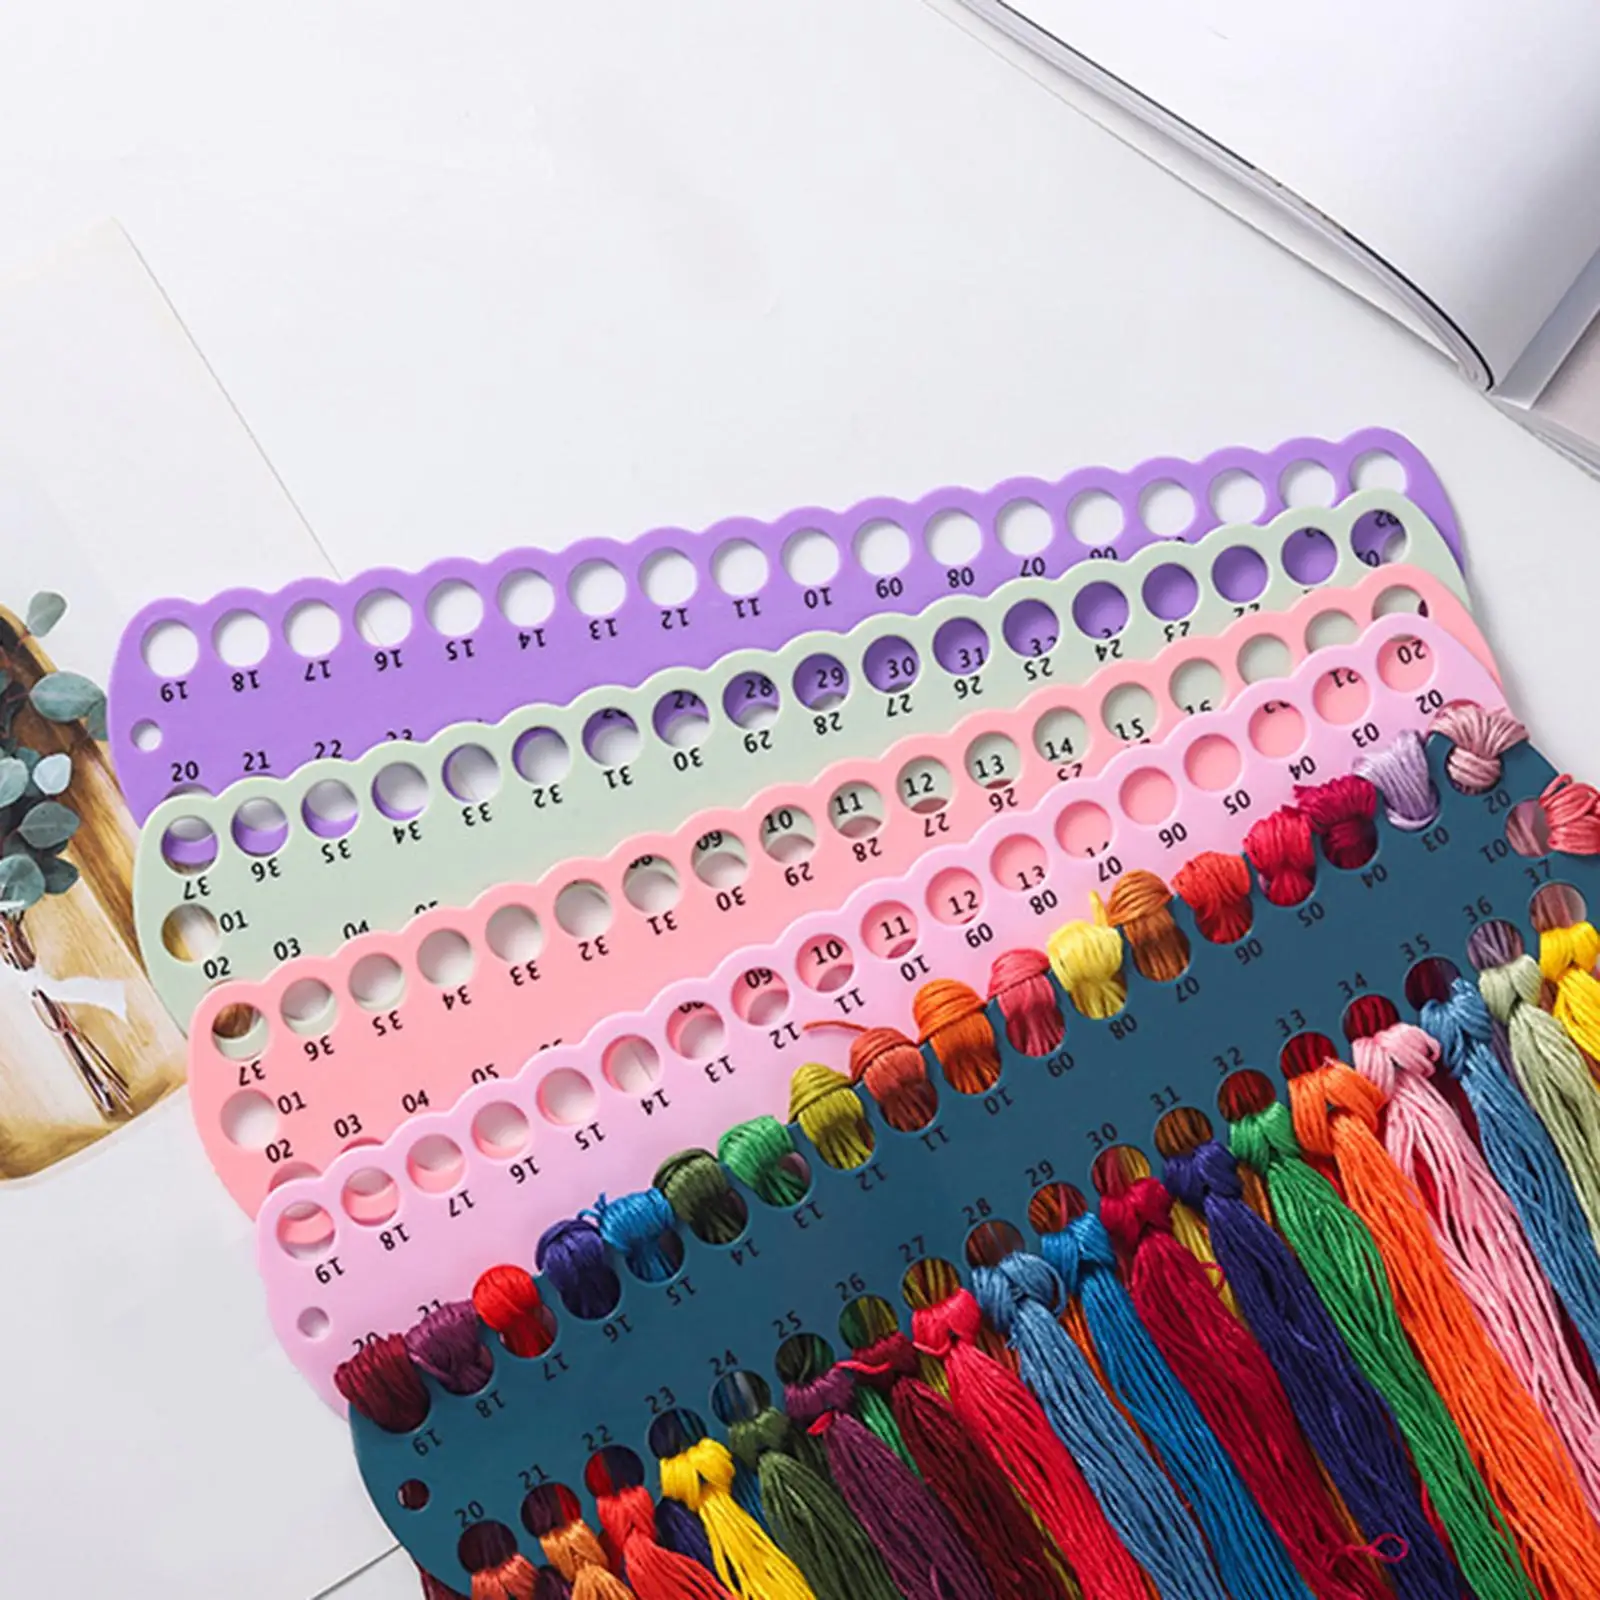 Embroidery Floss Organizer Threads Organiser Board Sewing Tools